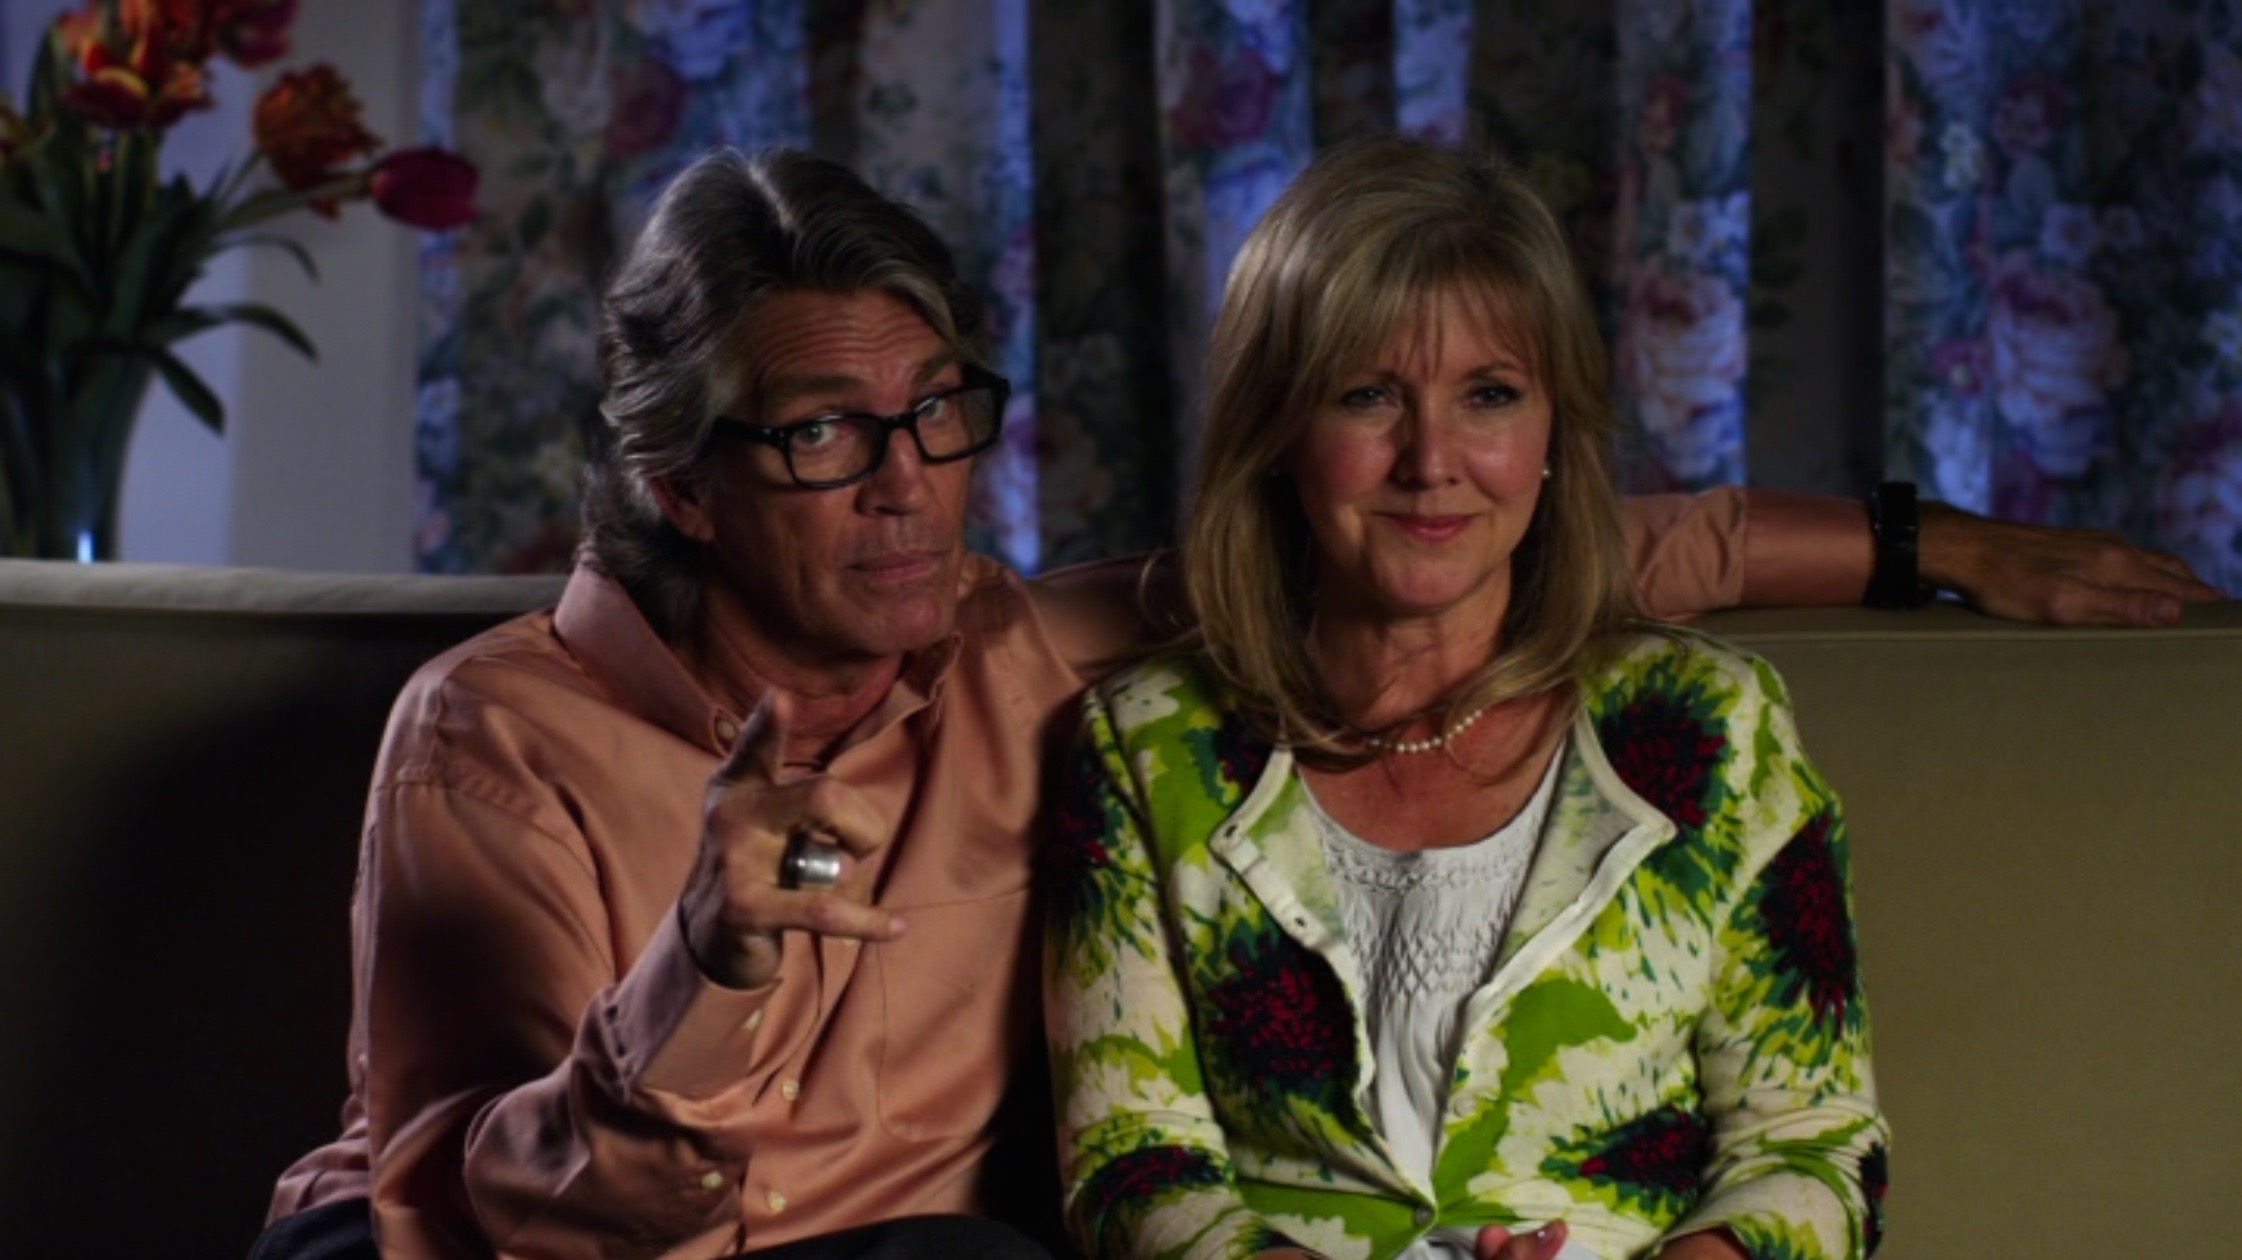 No Solicitors Eric Roberts & Beverly Randolph as Dr. & Mrs. Cutterman 2015